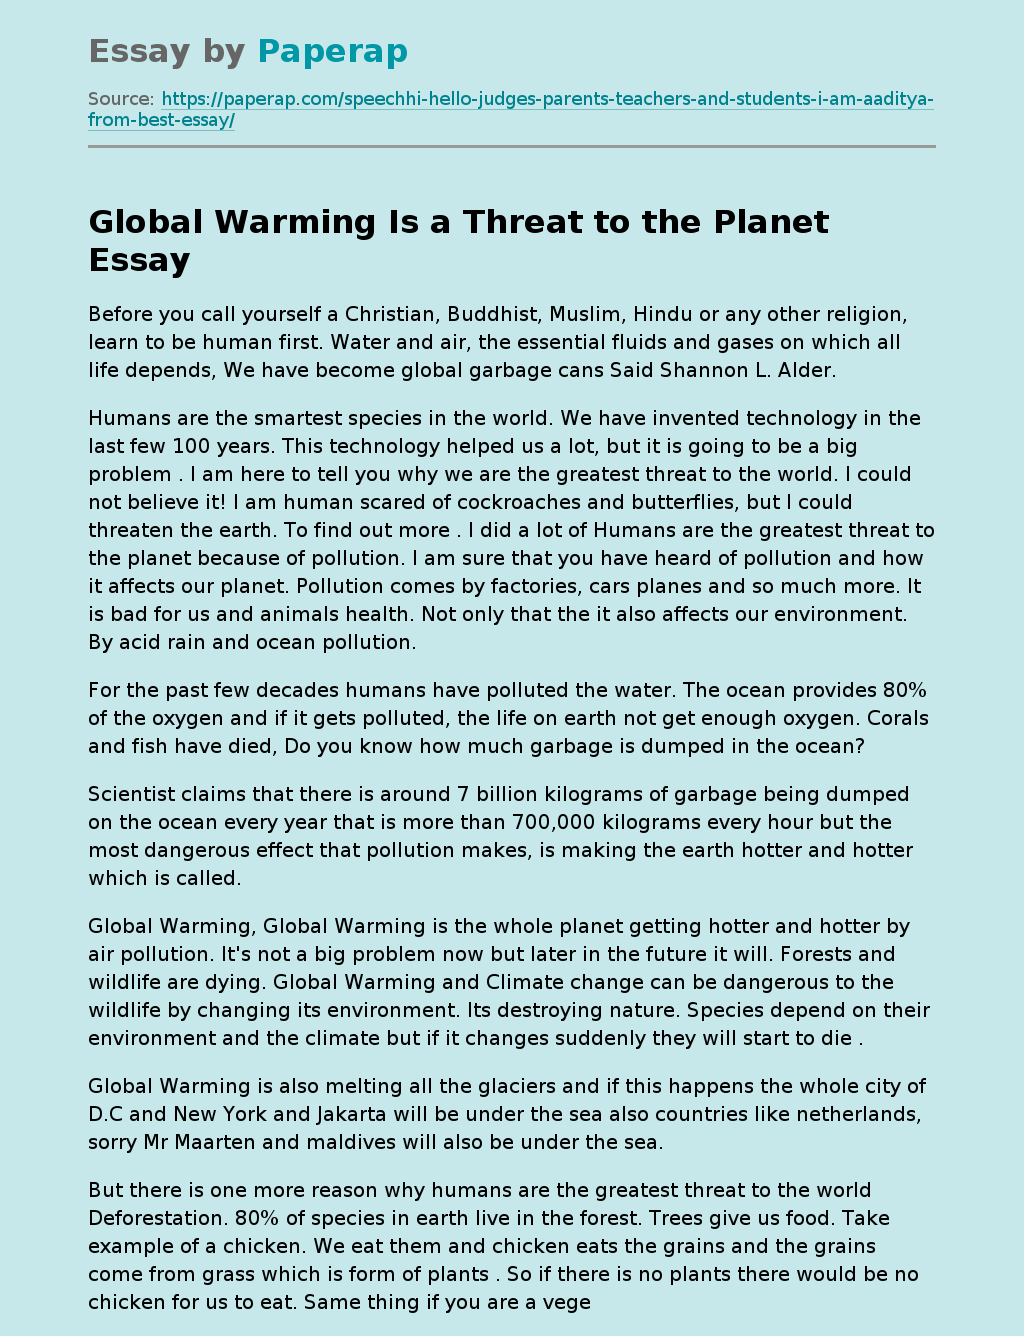 Global Warming Is a Threat to the Planet